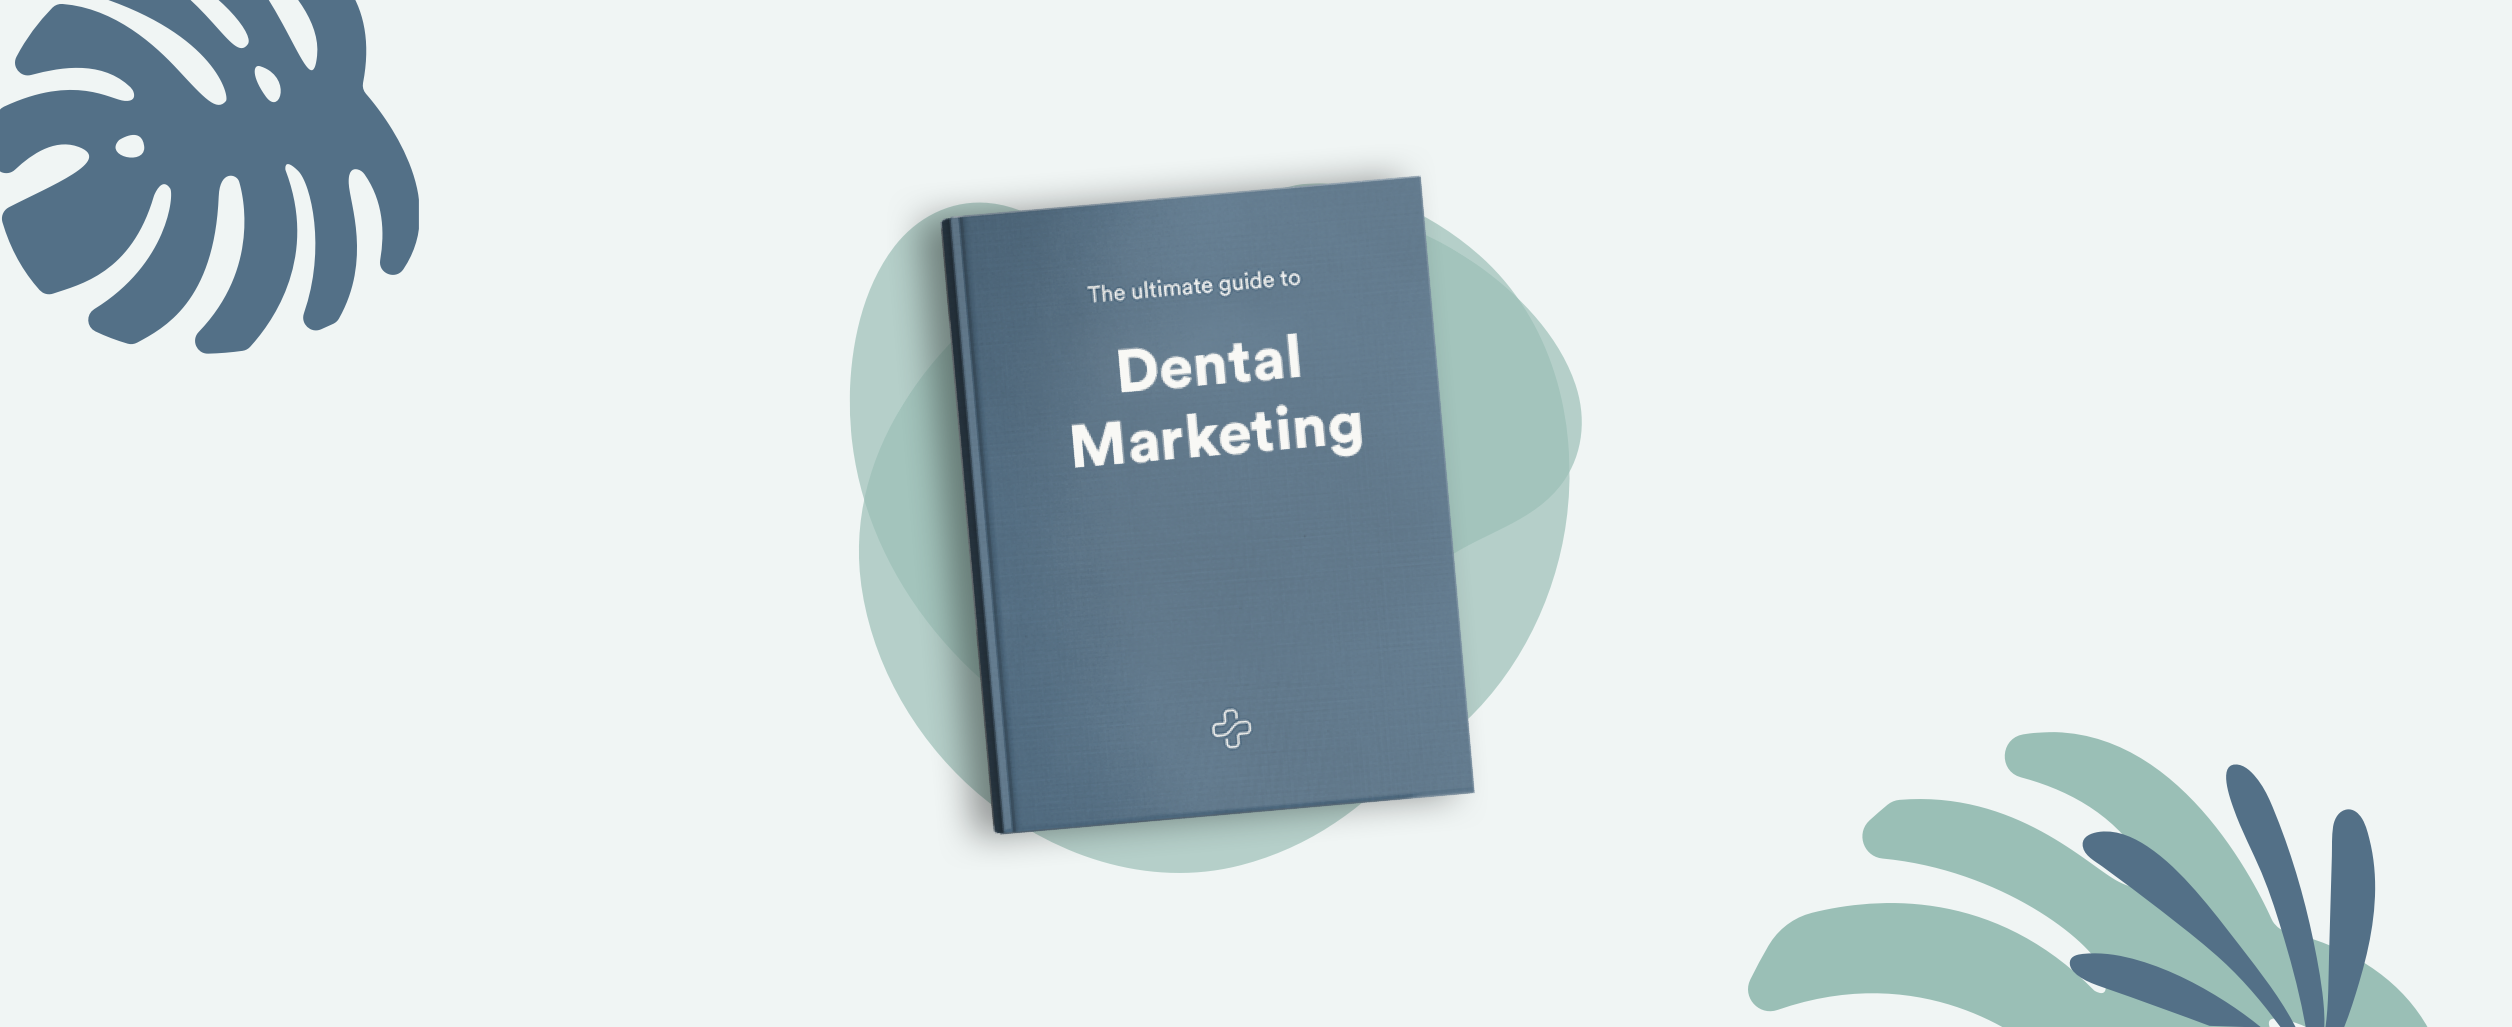 Dental marketing: Ad ideas & tips for new office patients